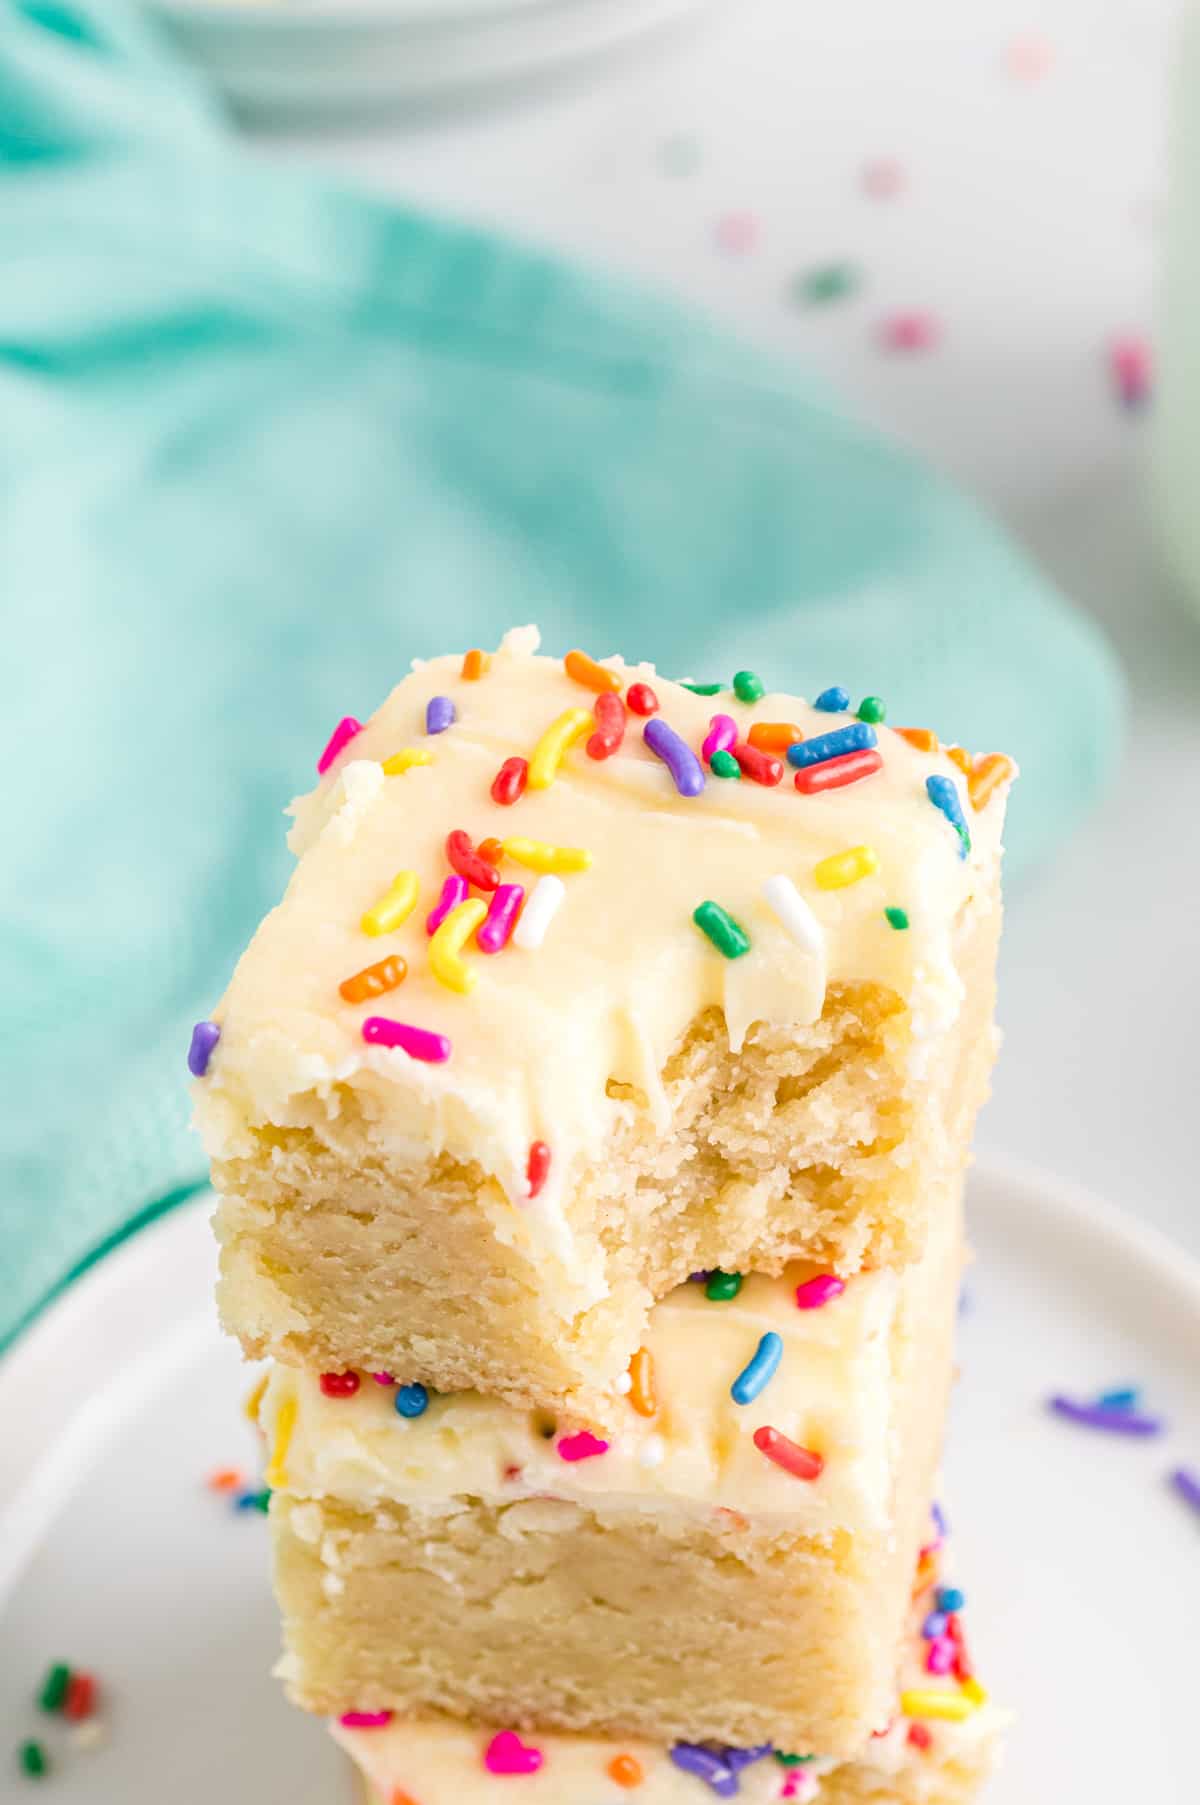 Frosted Sugar Cookie Bars with Sprinkles stacked on top of one another. The top bar has a bite taken out of it to show its thick and tender interior.